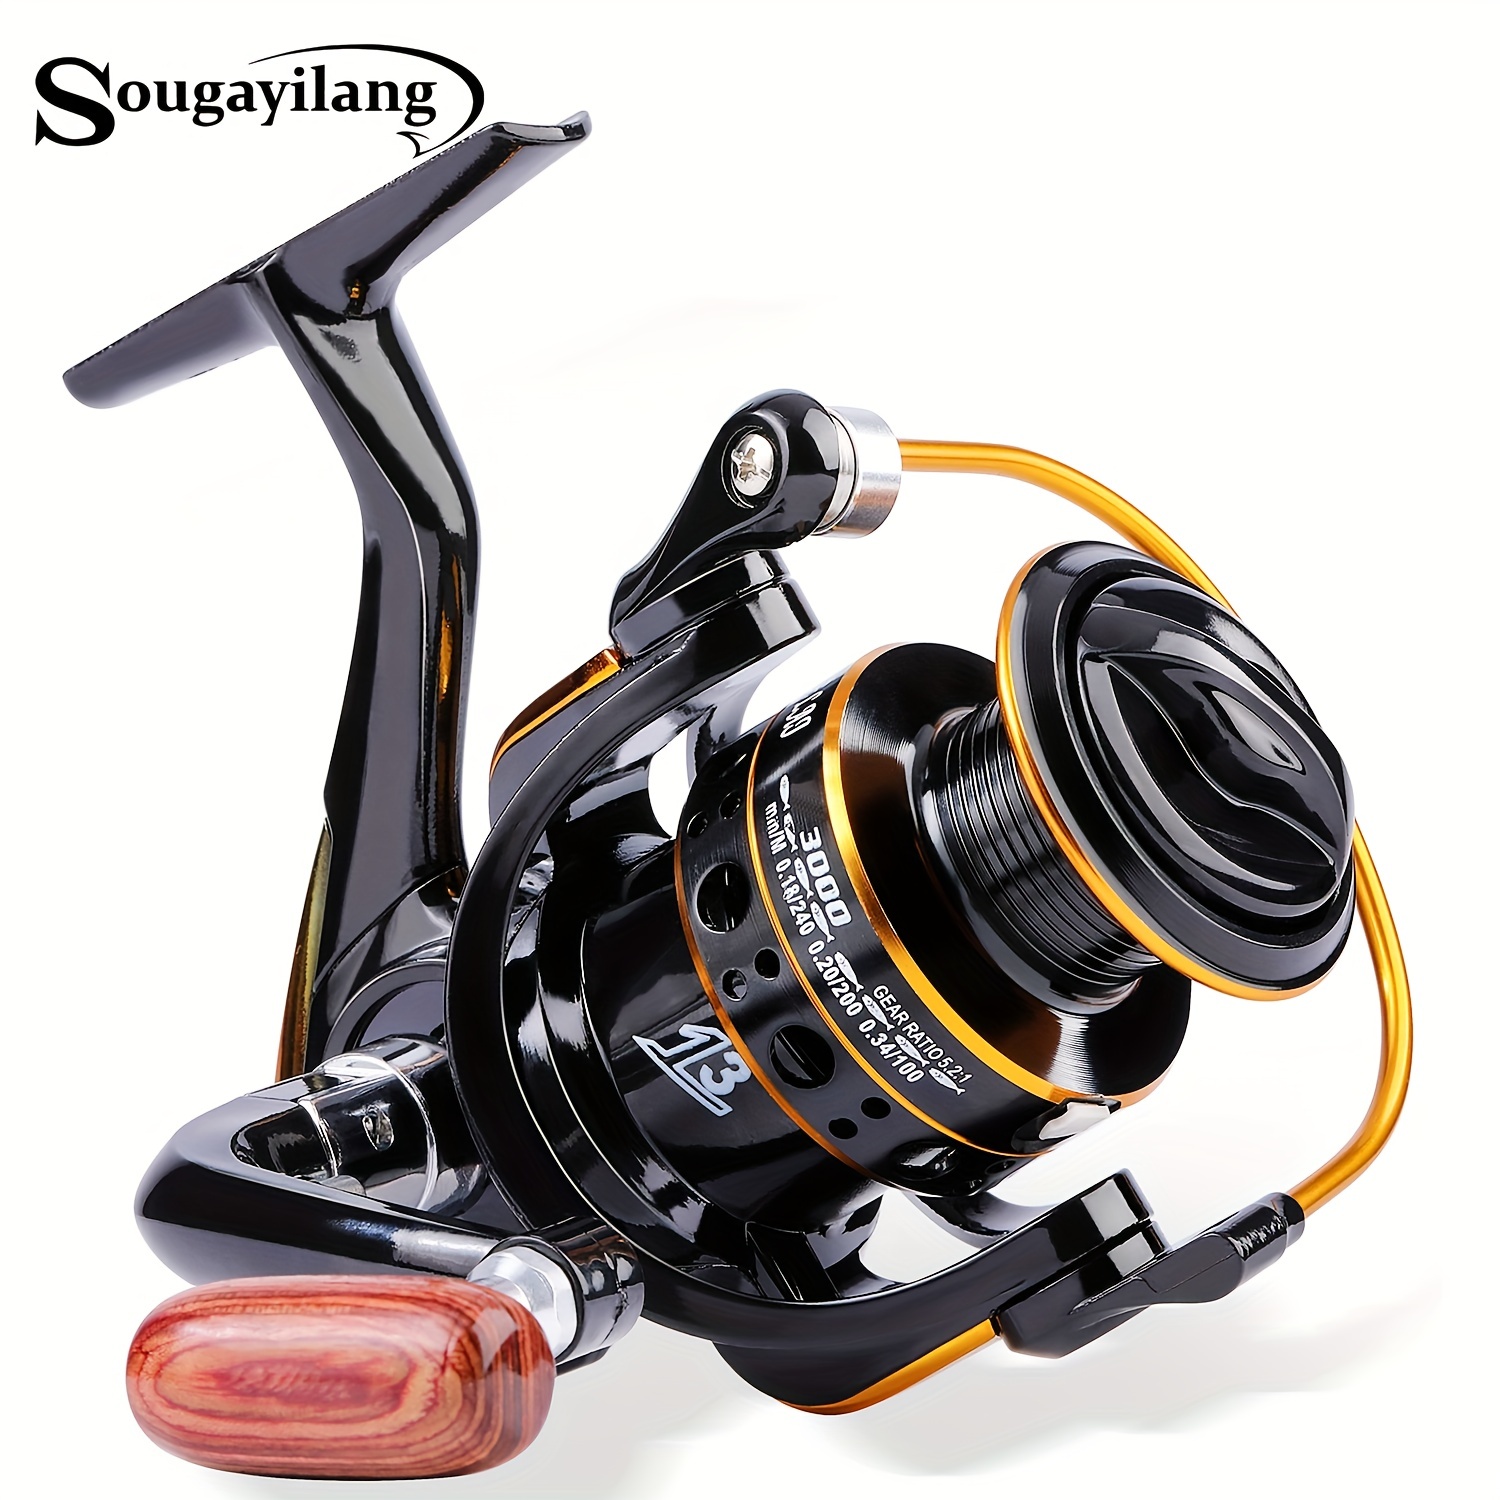 

Sougayilang 13bb Spinning Fishing Reel With Left/right Interchangeable Collapsible Metal Handle Aluminum Spool Fishing Reel High Gear Ratio Reel For Inshore Boat Rock Freshwater Saltwater Fishing Reel